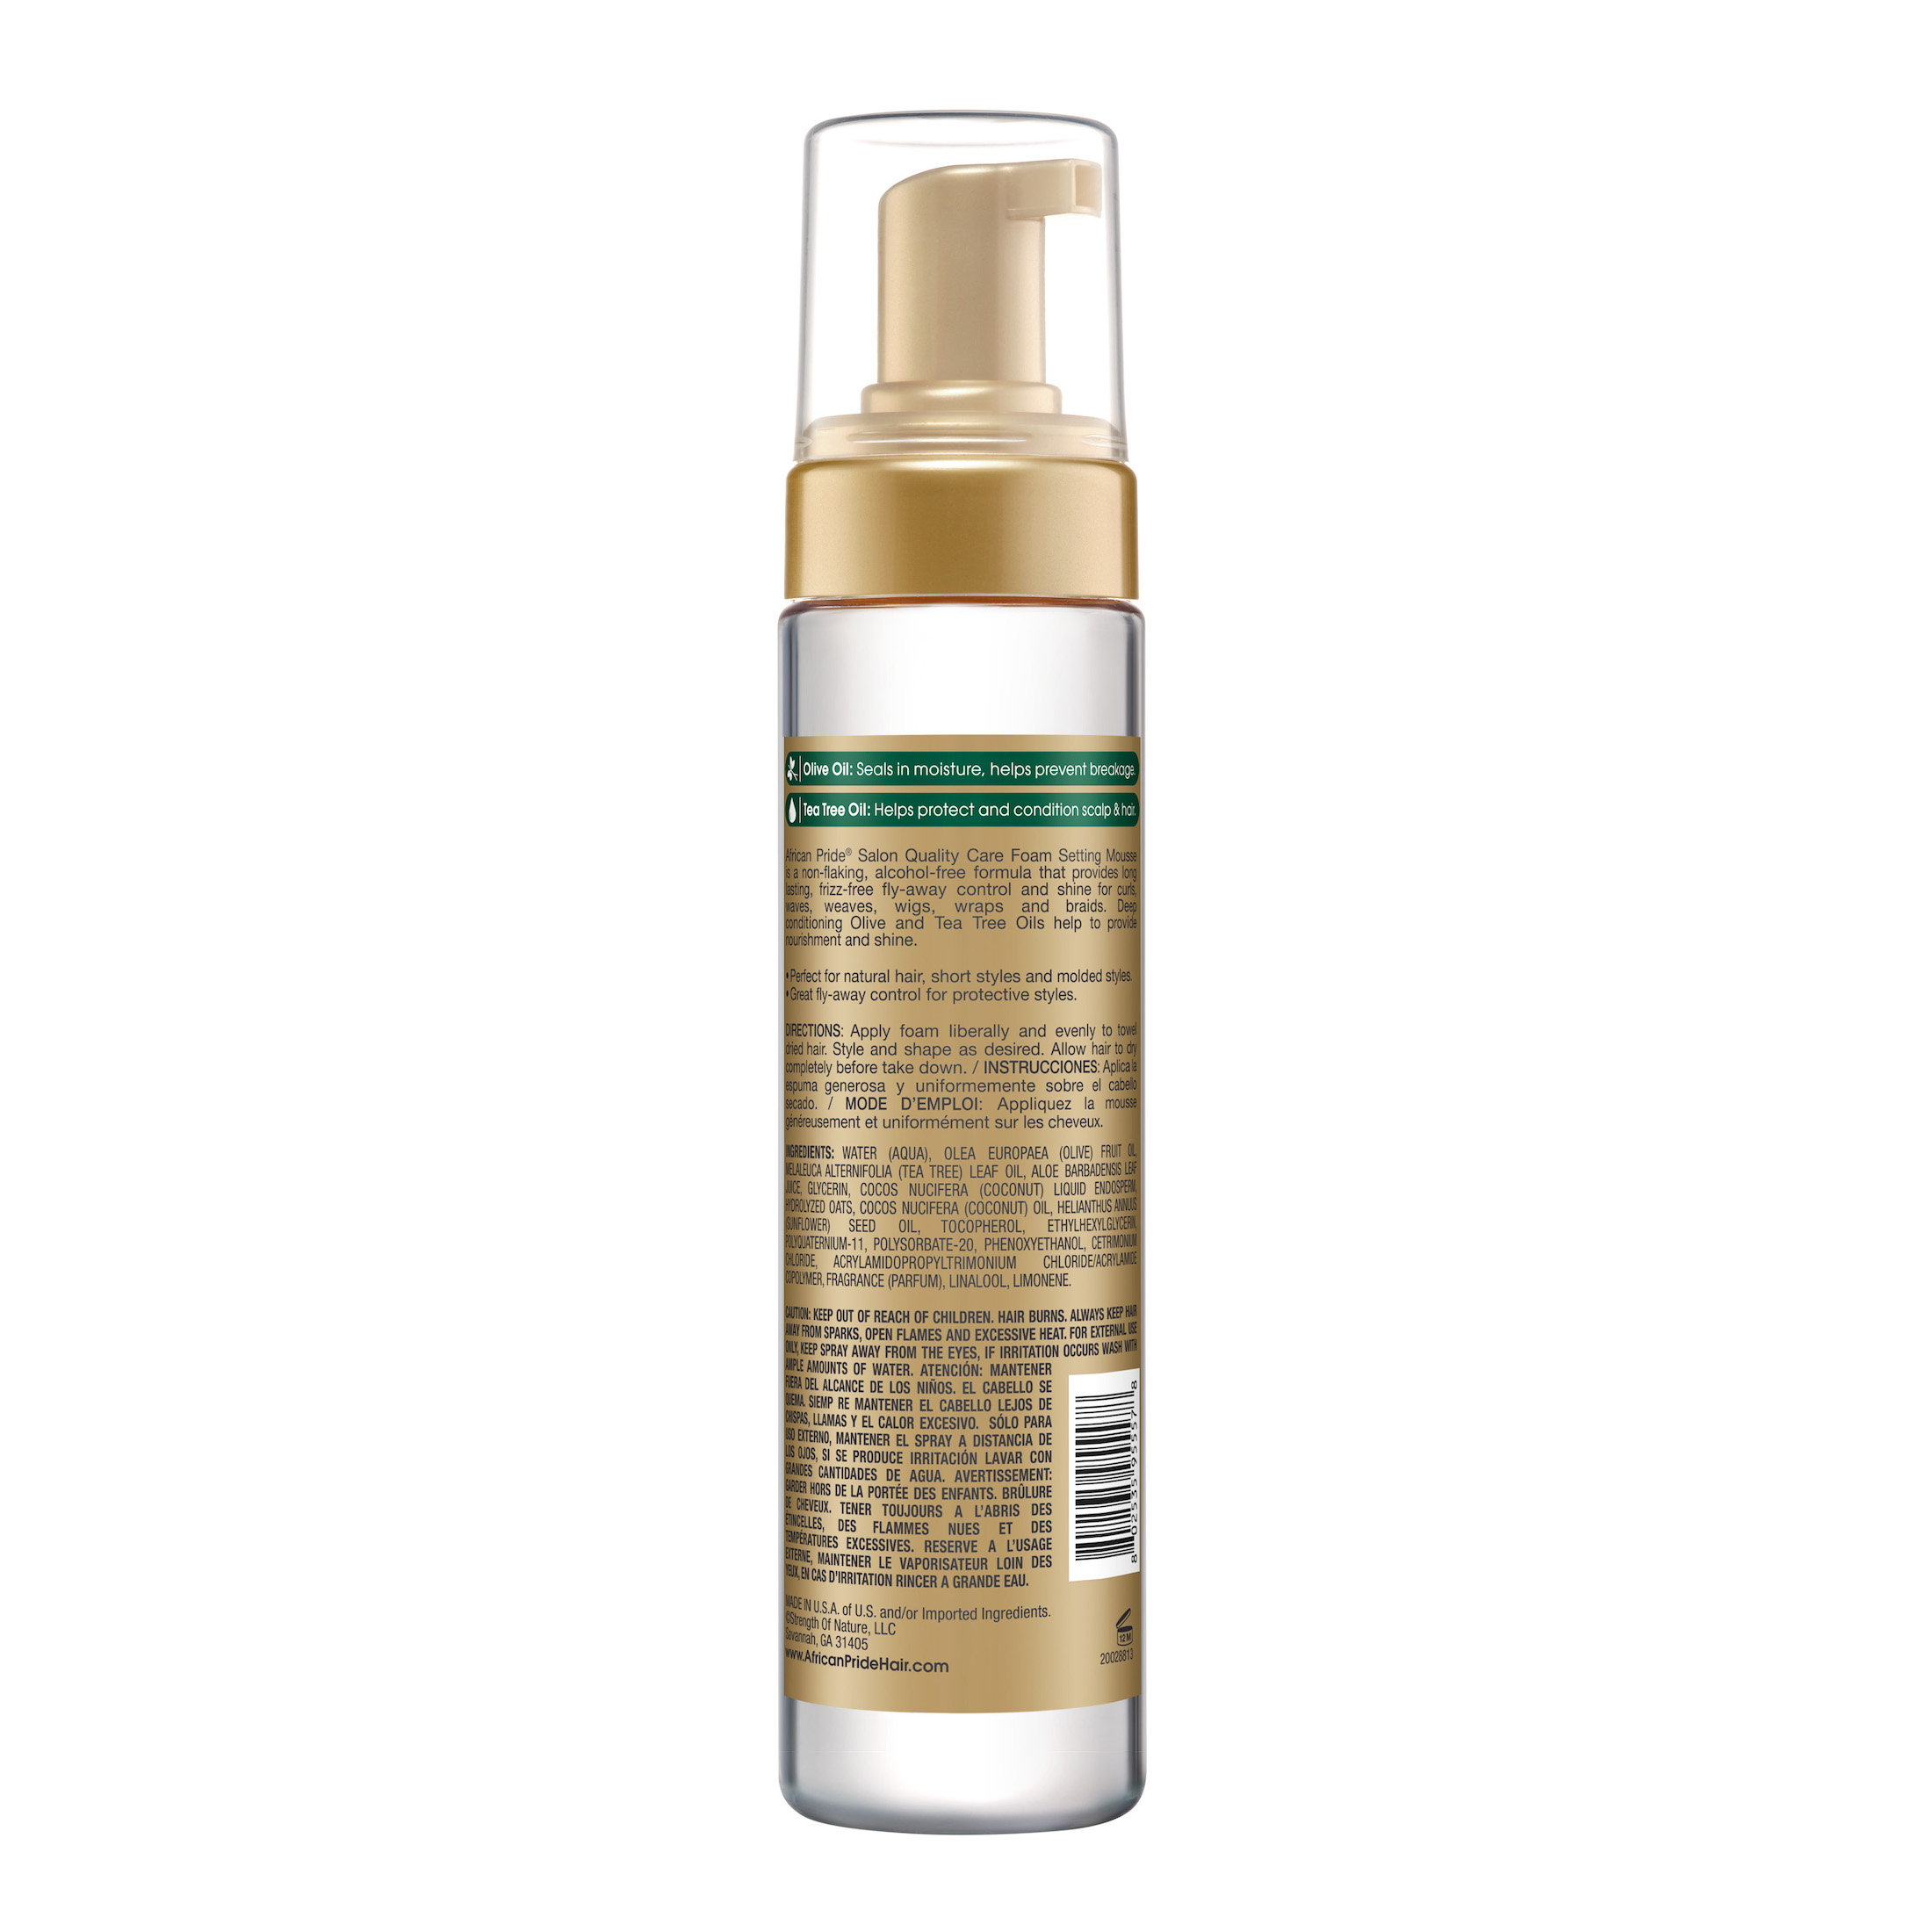 African Pride Olive Miracle Mousse, Foaming 8.5 oz., Moisturizing, Curly, Unisex - image 2 of 6